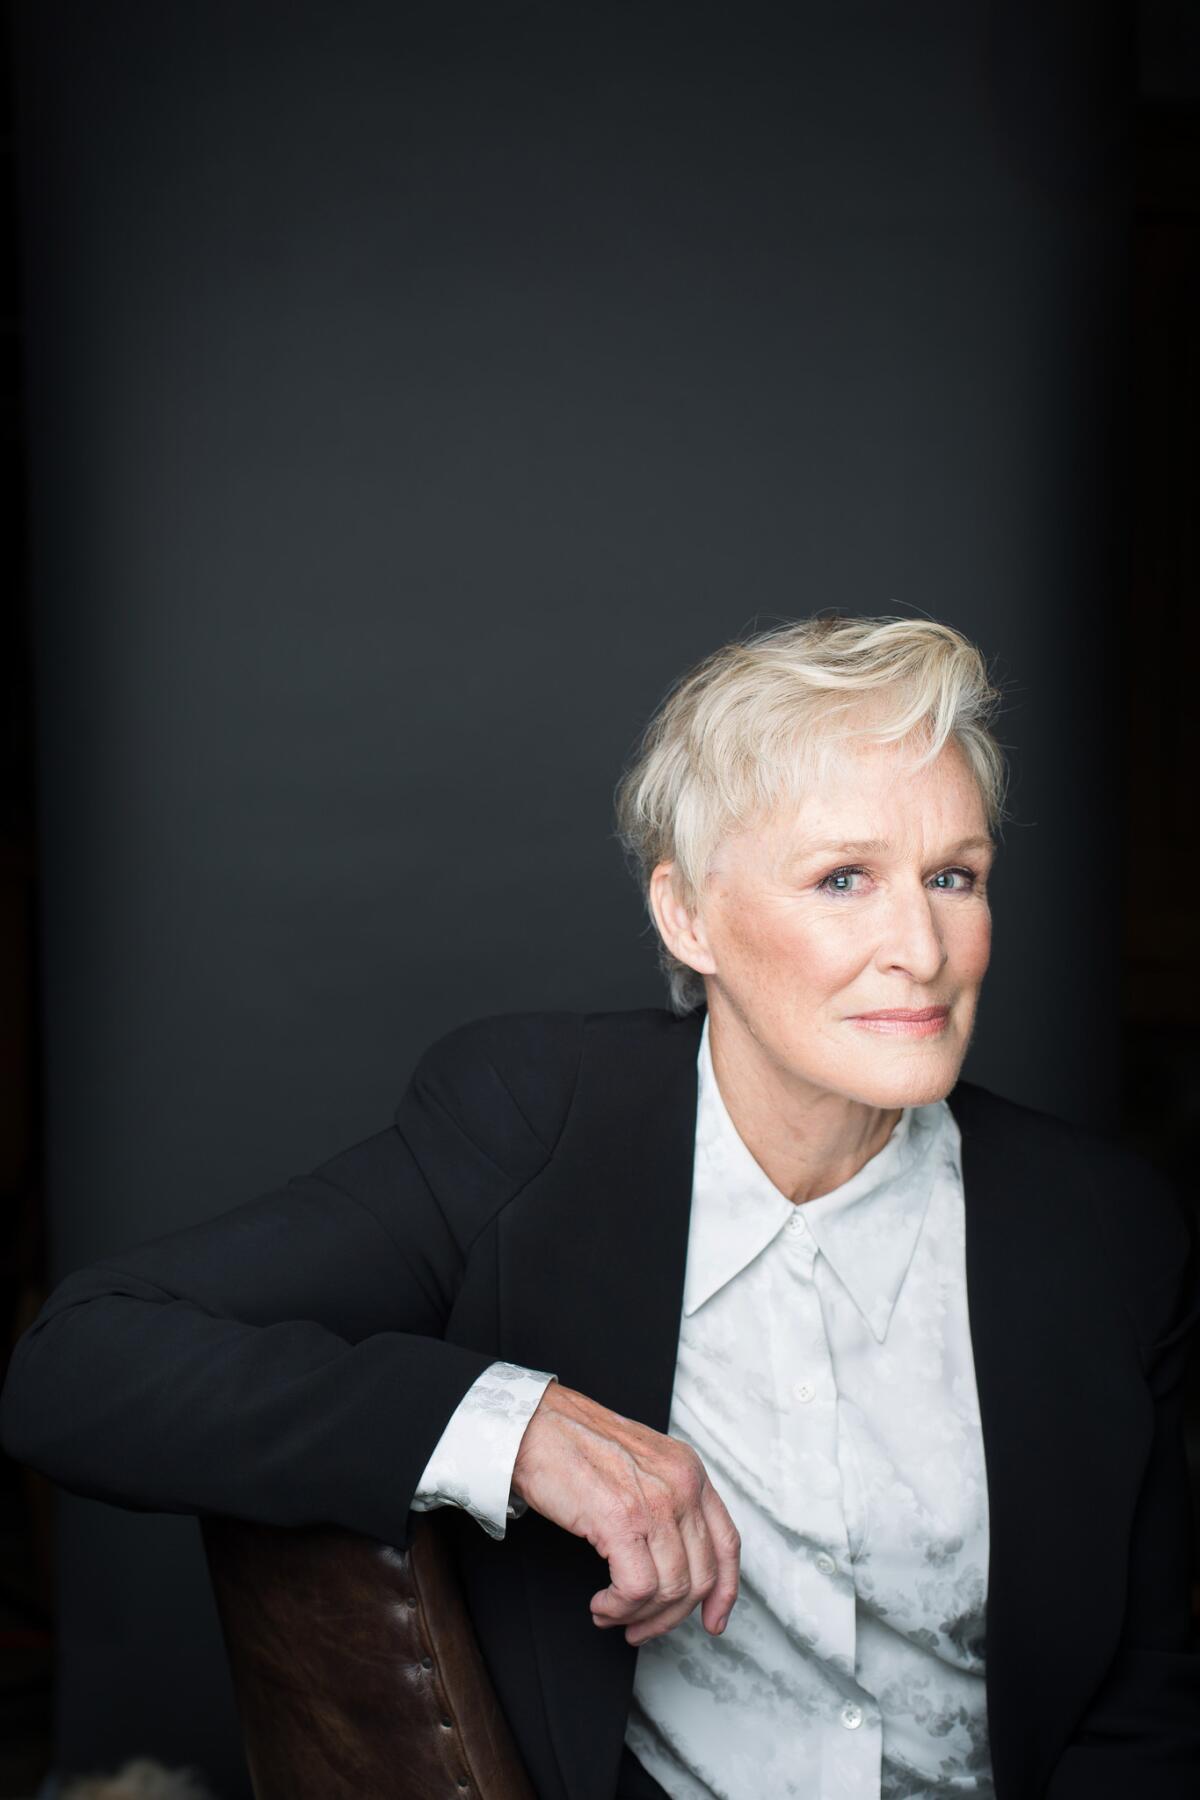 Actress Glenn Close, whose role in "The Wife"' is leading to Oscar speculation, poses for a portrait at the Public Theater on Oct. 9, 2018 in New York City. Close has been nominated six times, but has yet to win.